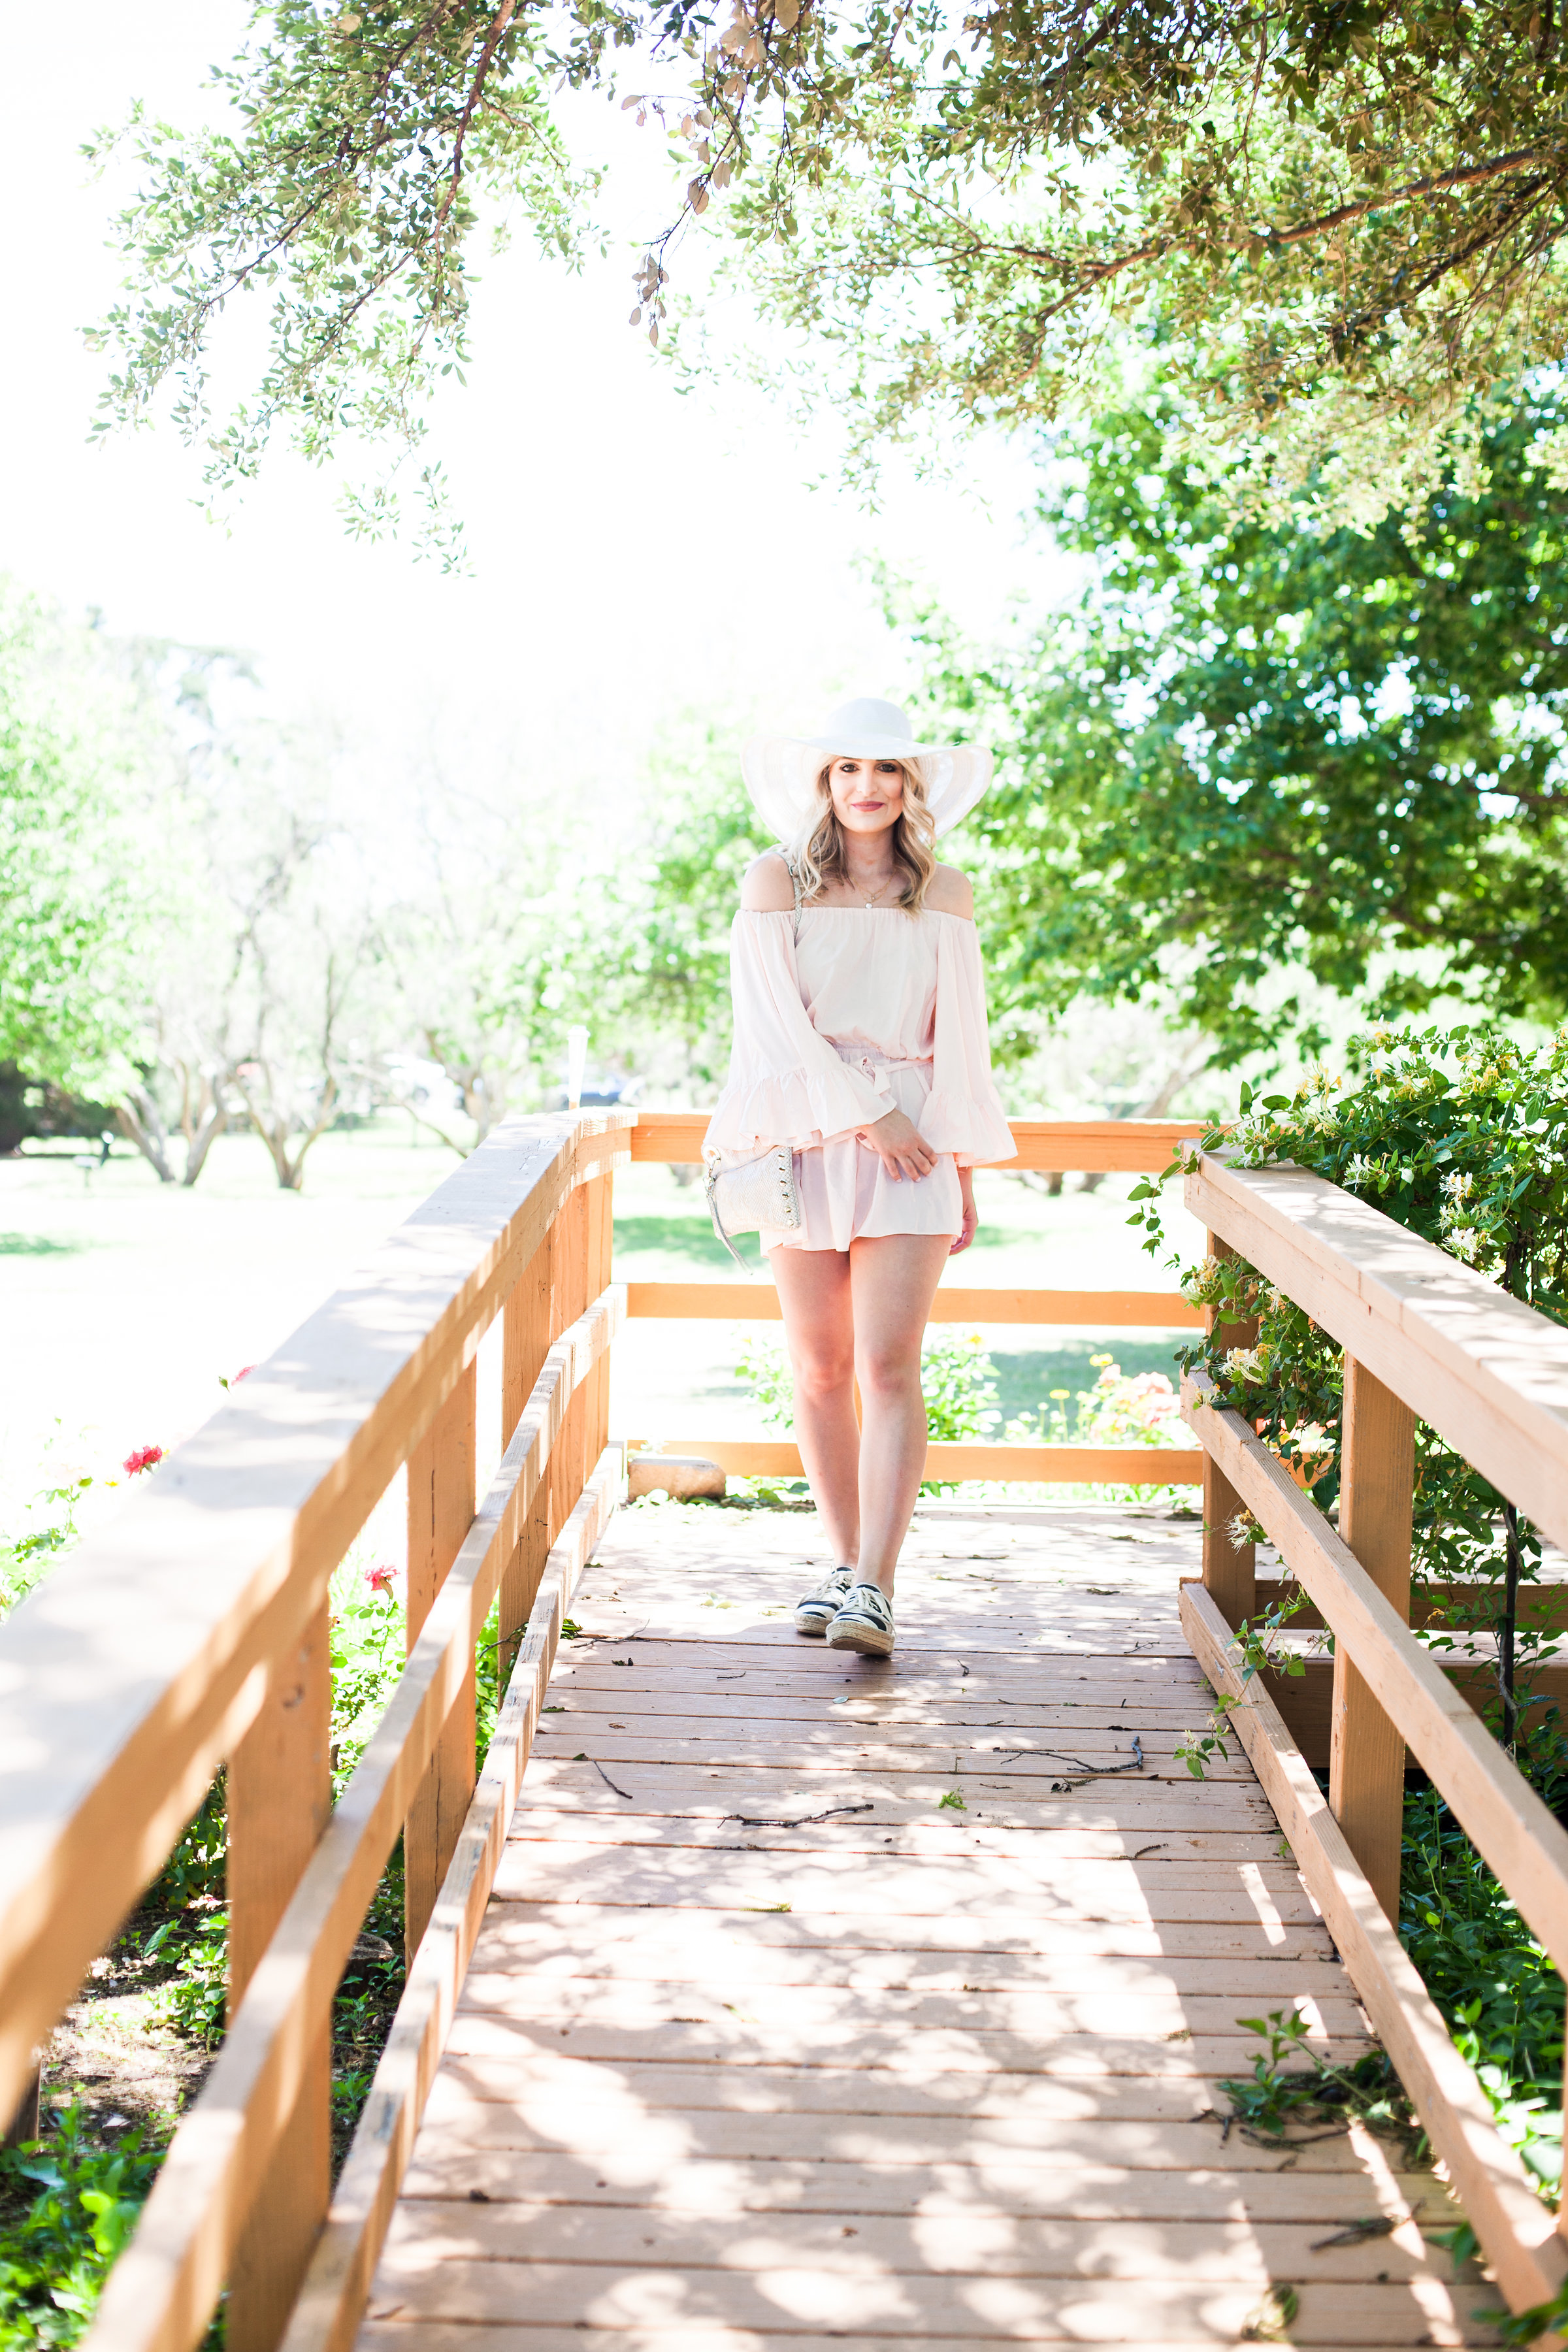 10 Summer Must-Have Wardrobe Pieces You Need This Summer by lifestyle and fashion blogger Audrey Madison Stowe based in Texas